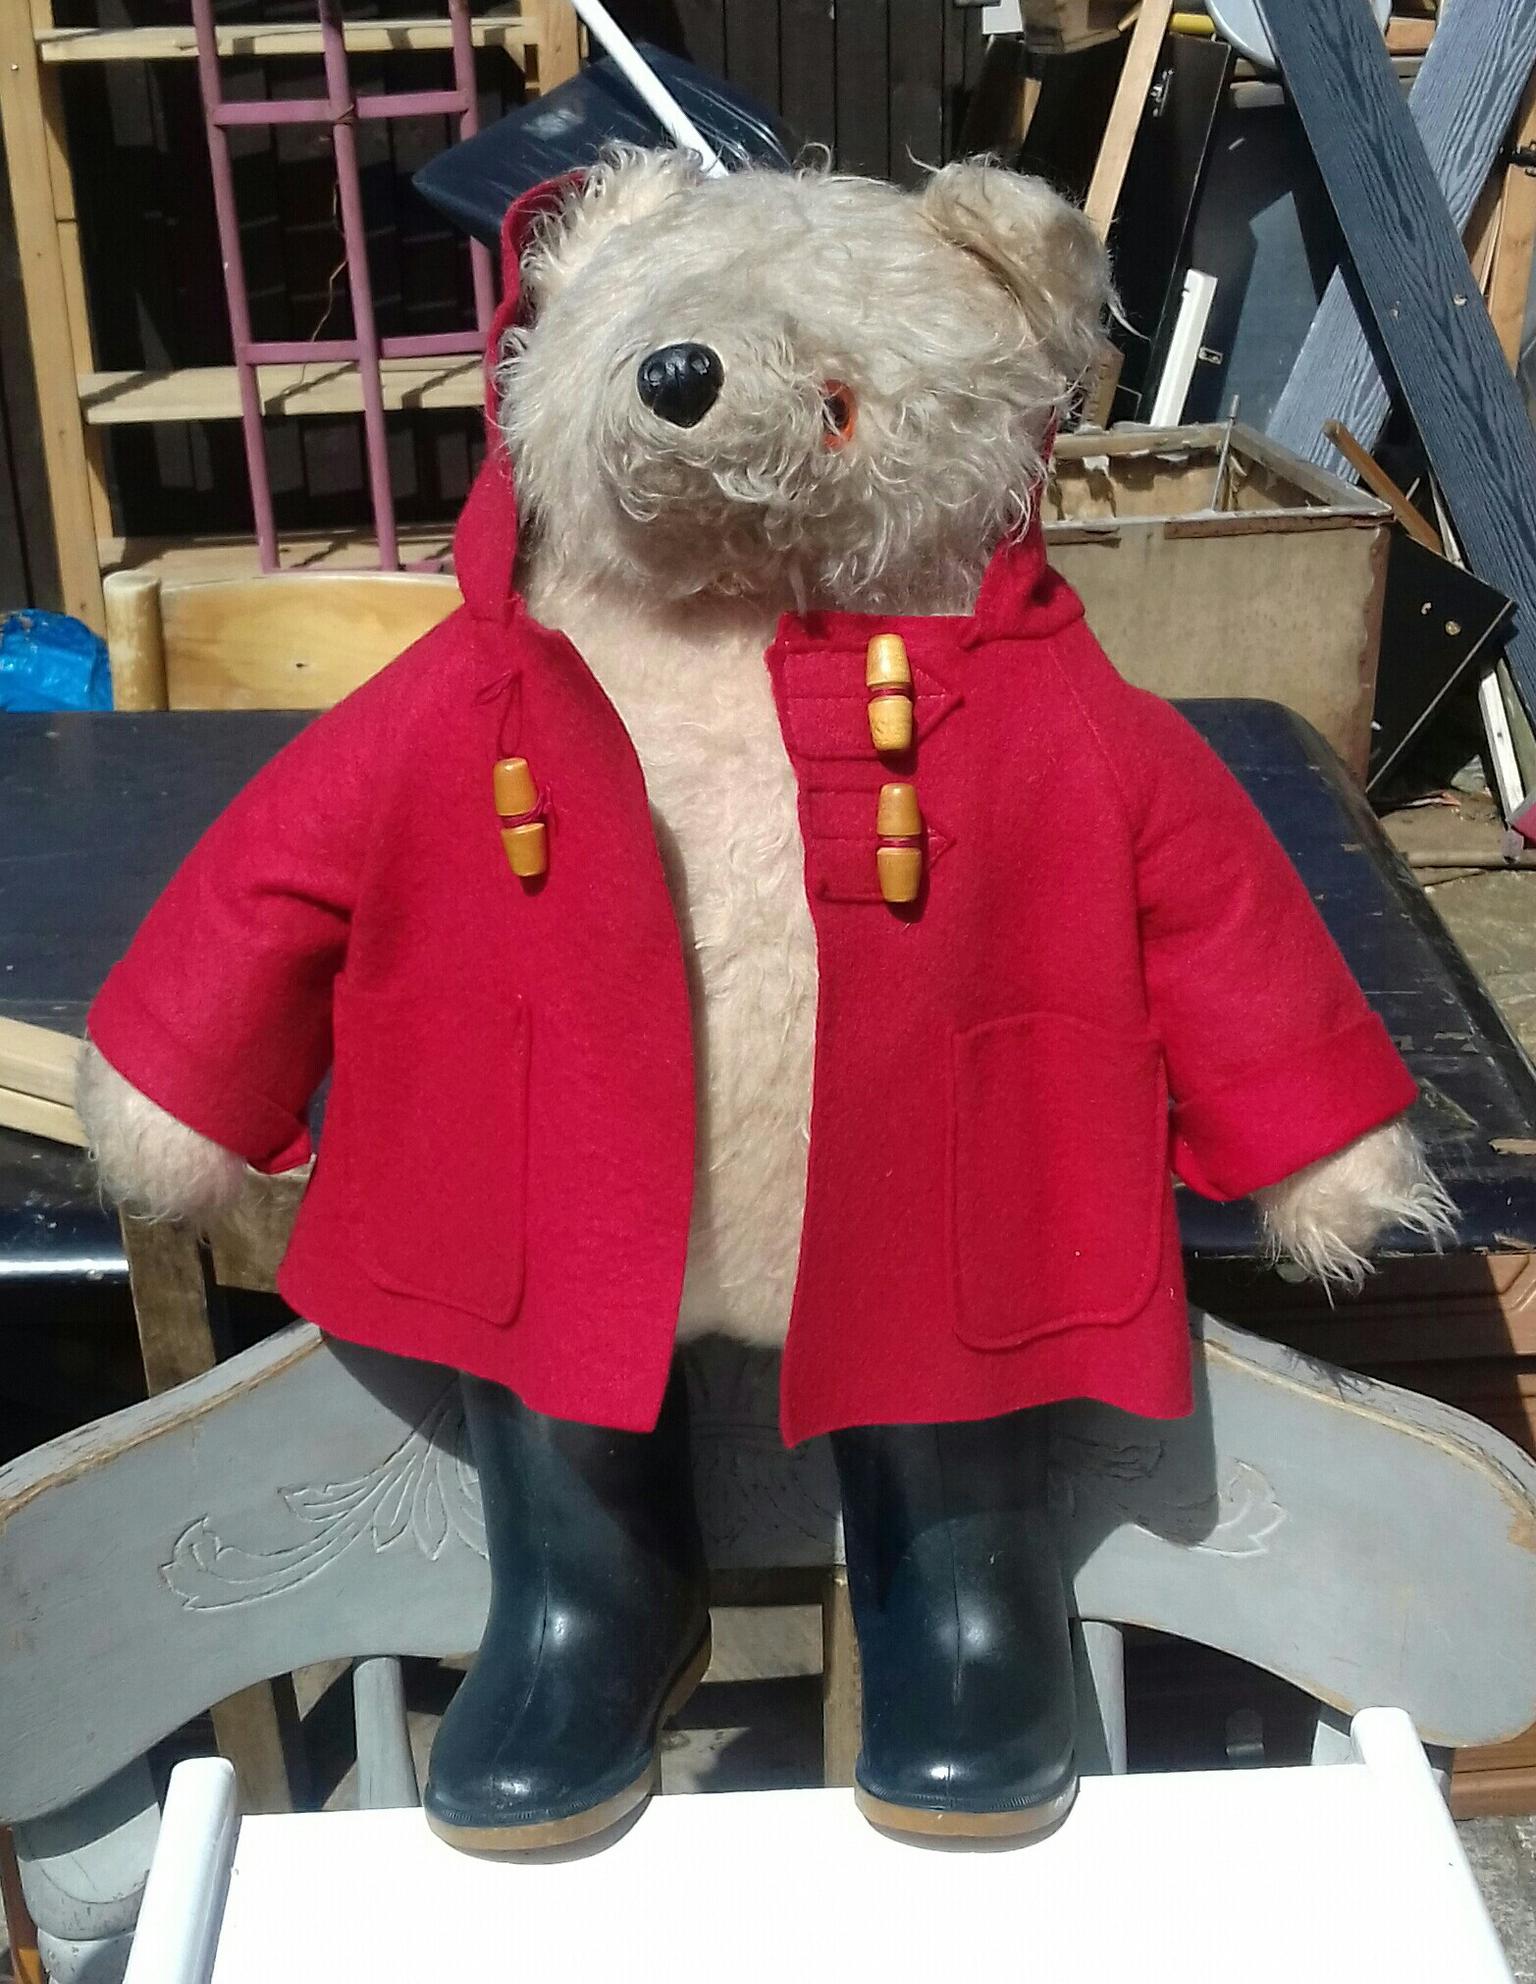 ORIGINAL PADDINGTON BEAR WITH DUNLOP WELLIES in NG22 Markham for £40.00 ...